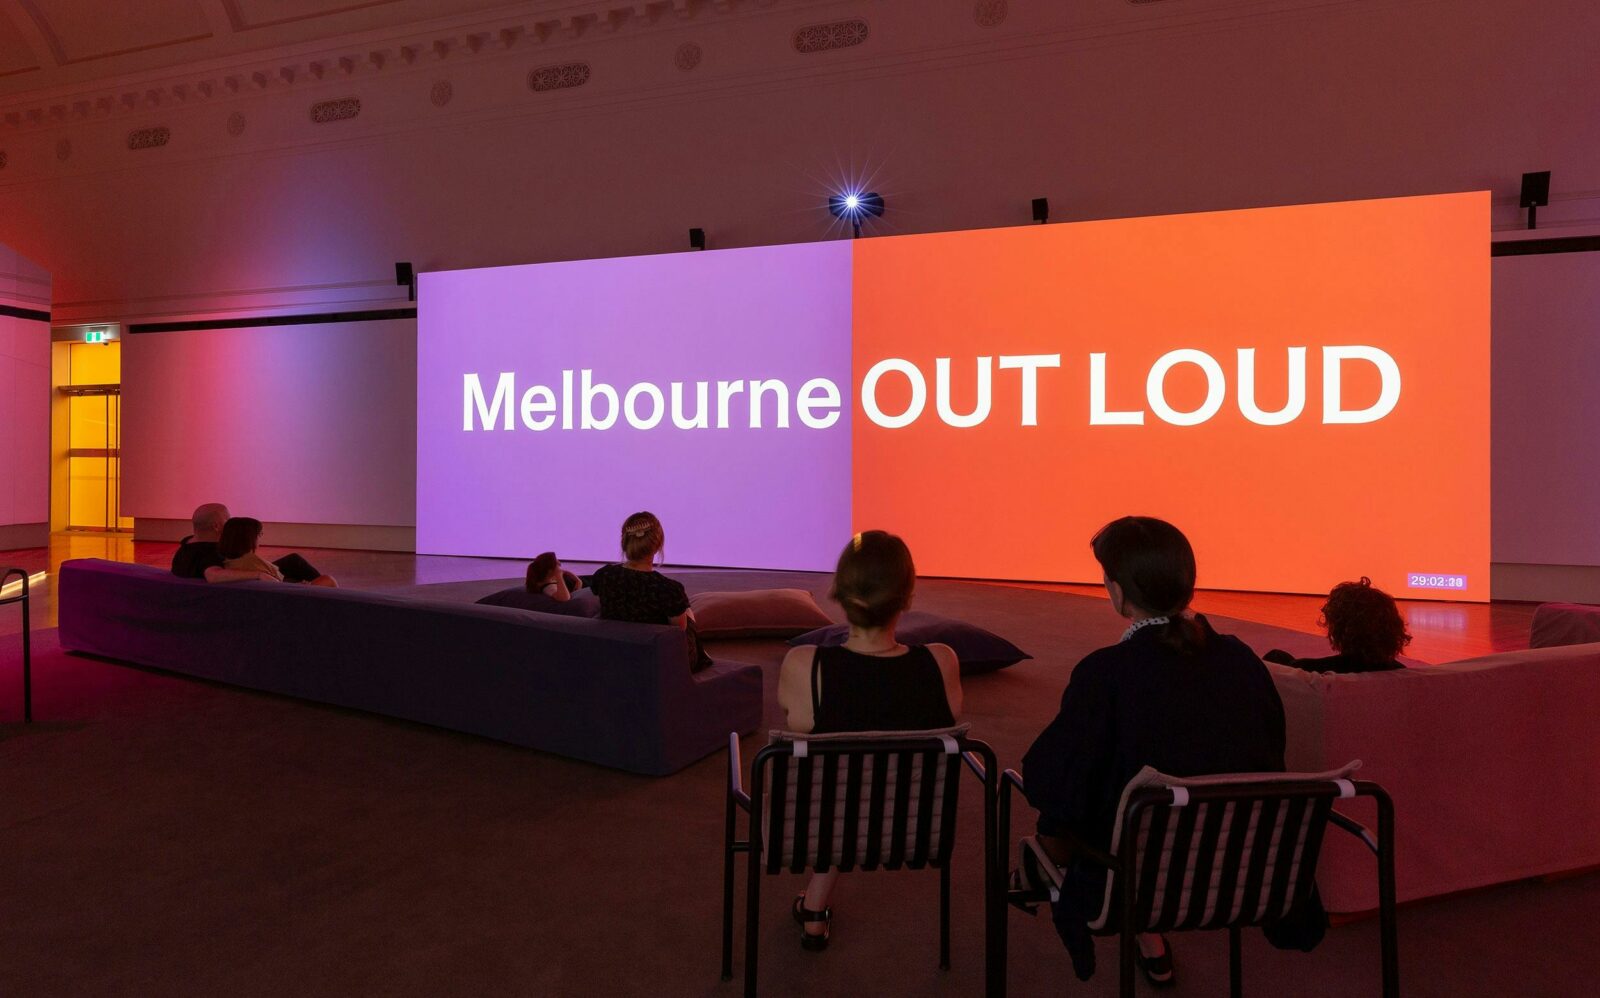 People sitting on couches in front of two screens that say Melbourne Out Loud